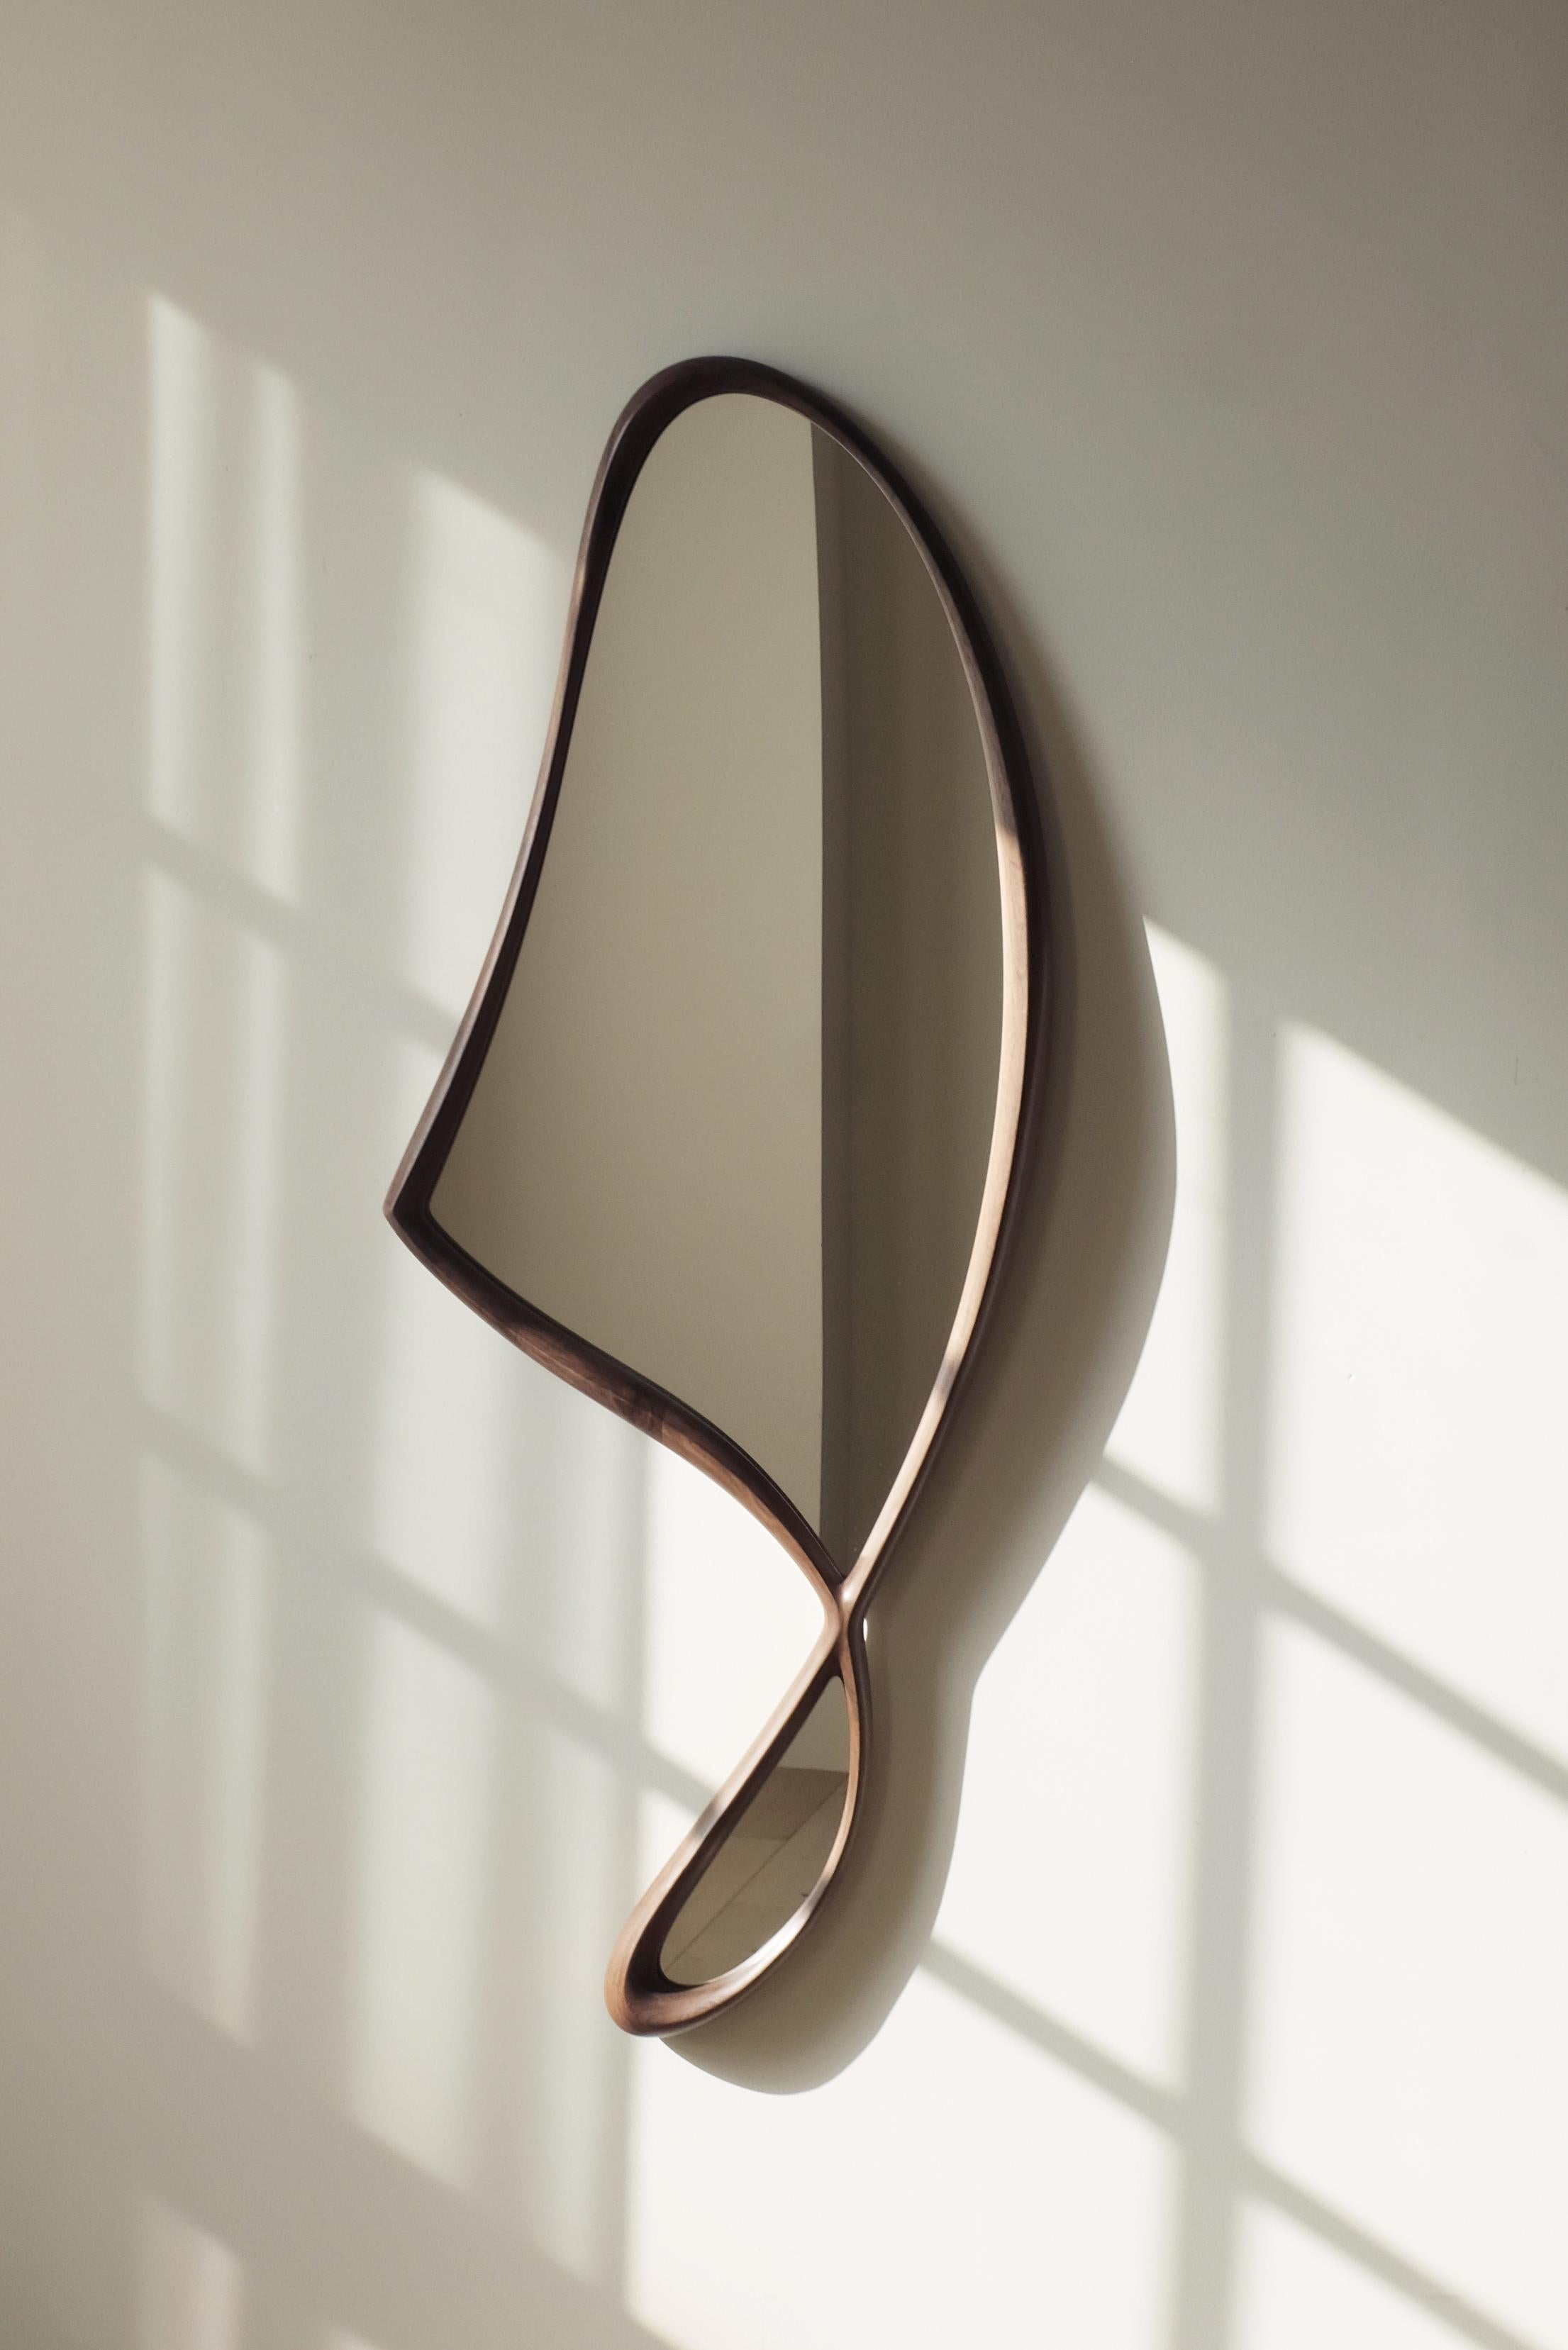 Asymmetrical 'Momentum Mirror II' by Soo Joo , Wall Mirror in Walnut In New Condition For Sale In New York, NY